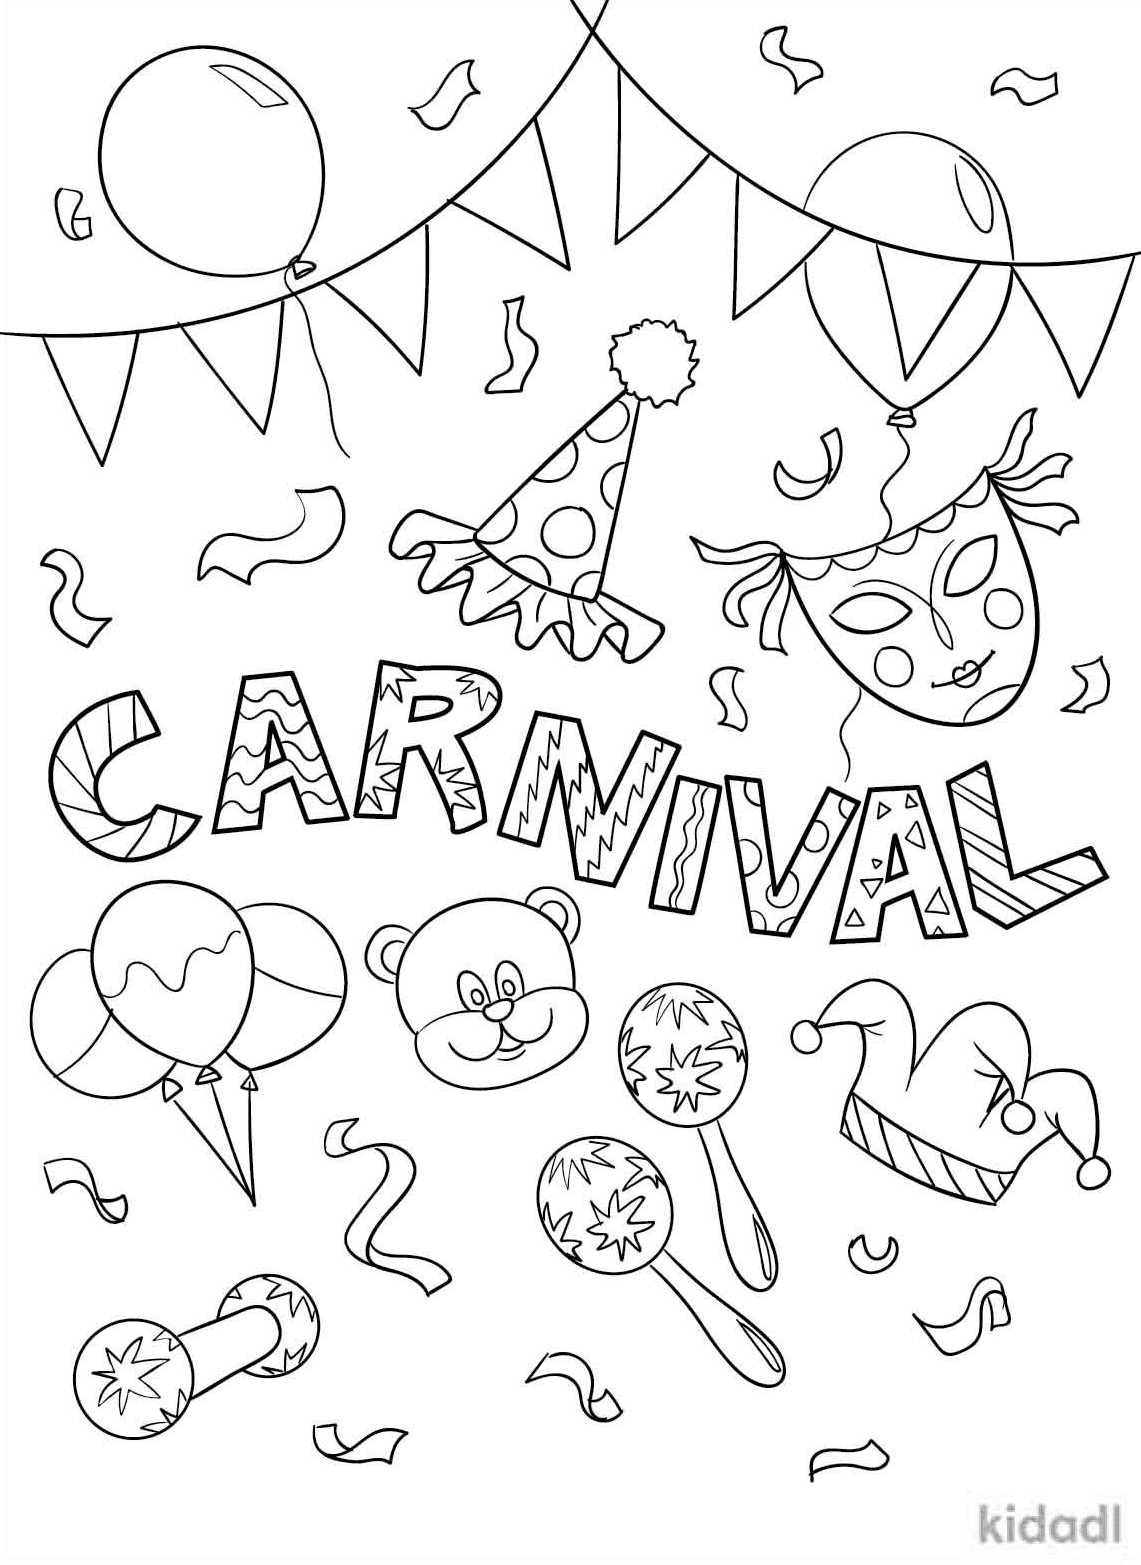 carnival-free-printable-coloring-page-free-printable-coloring-pages